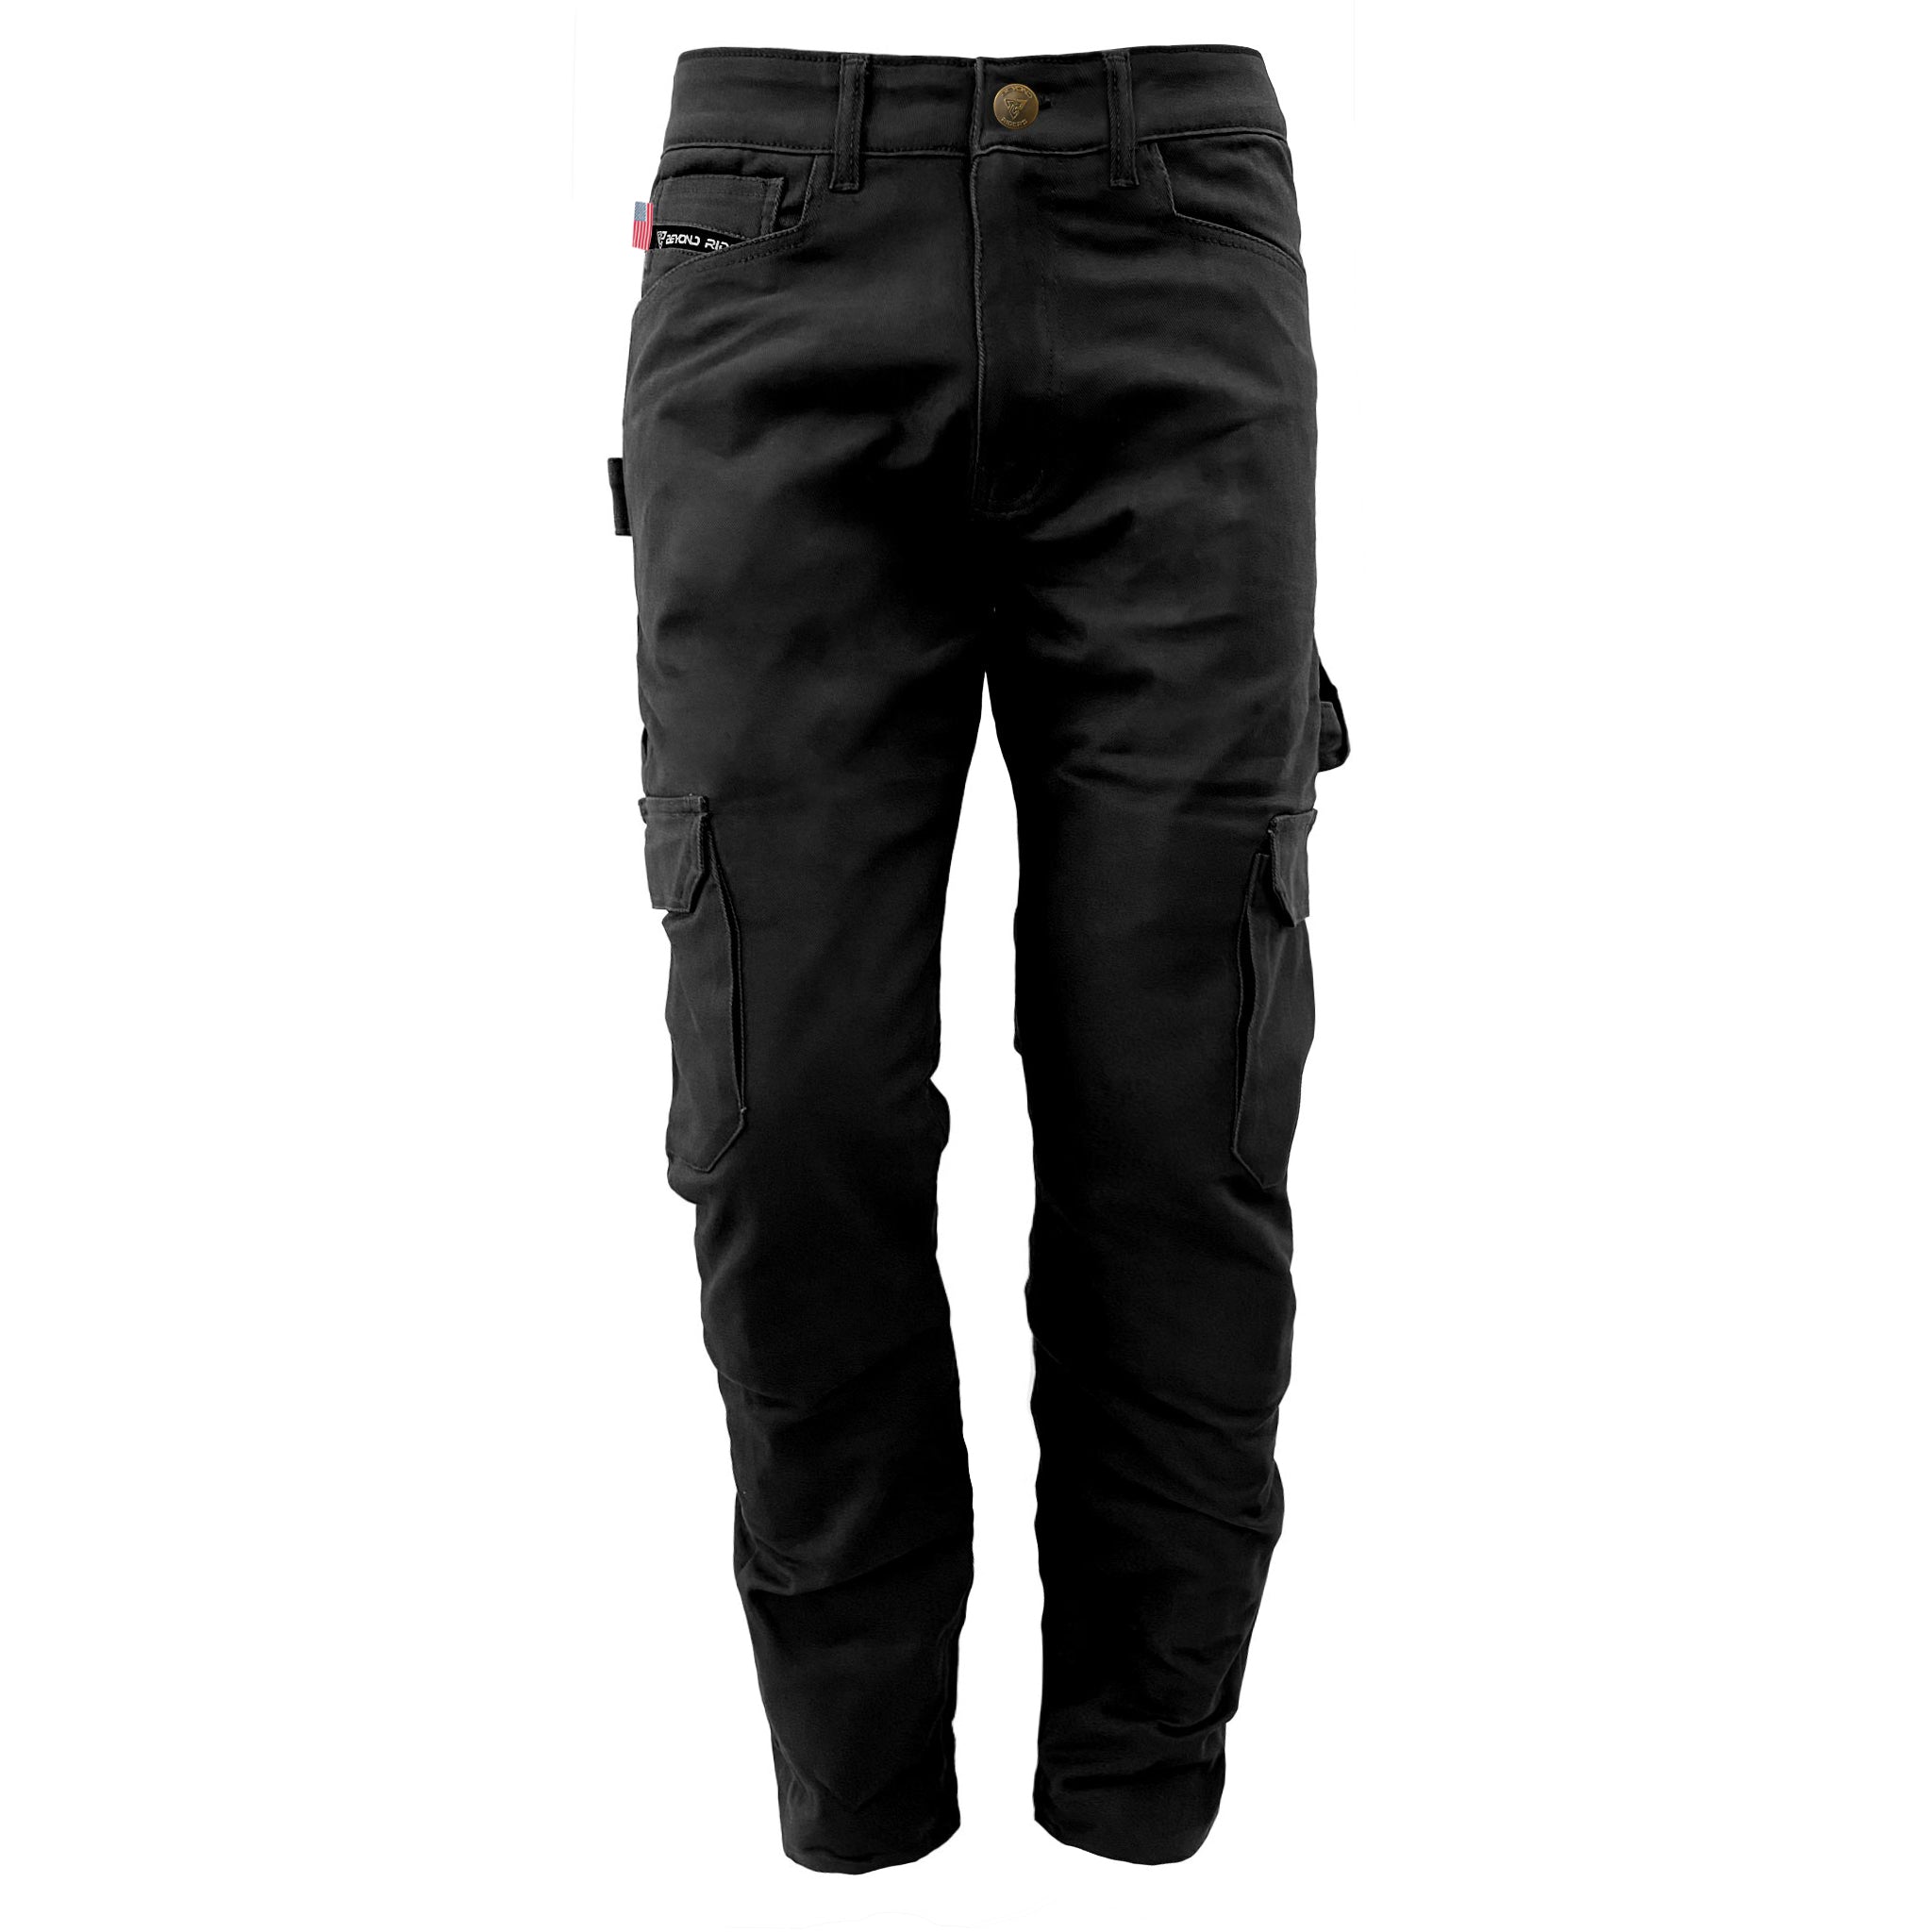 men's-cargo-pants-relaxed-fit-in-solid-black-front